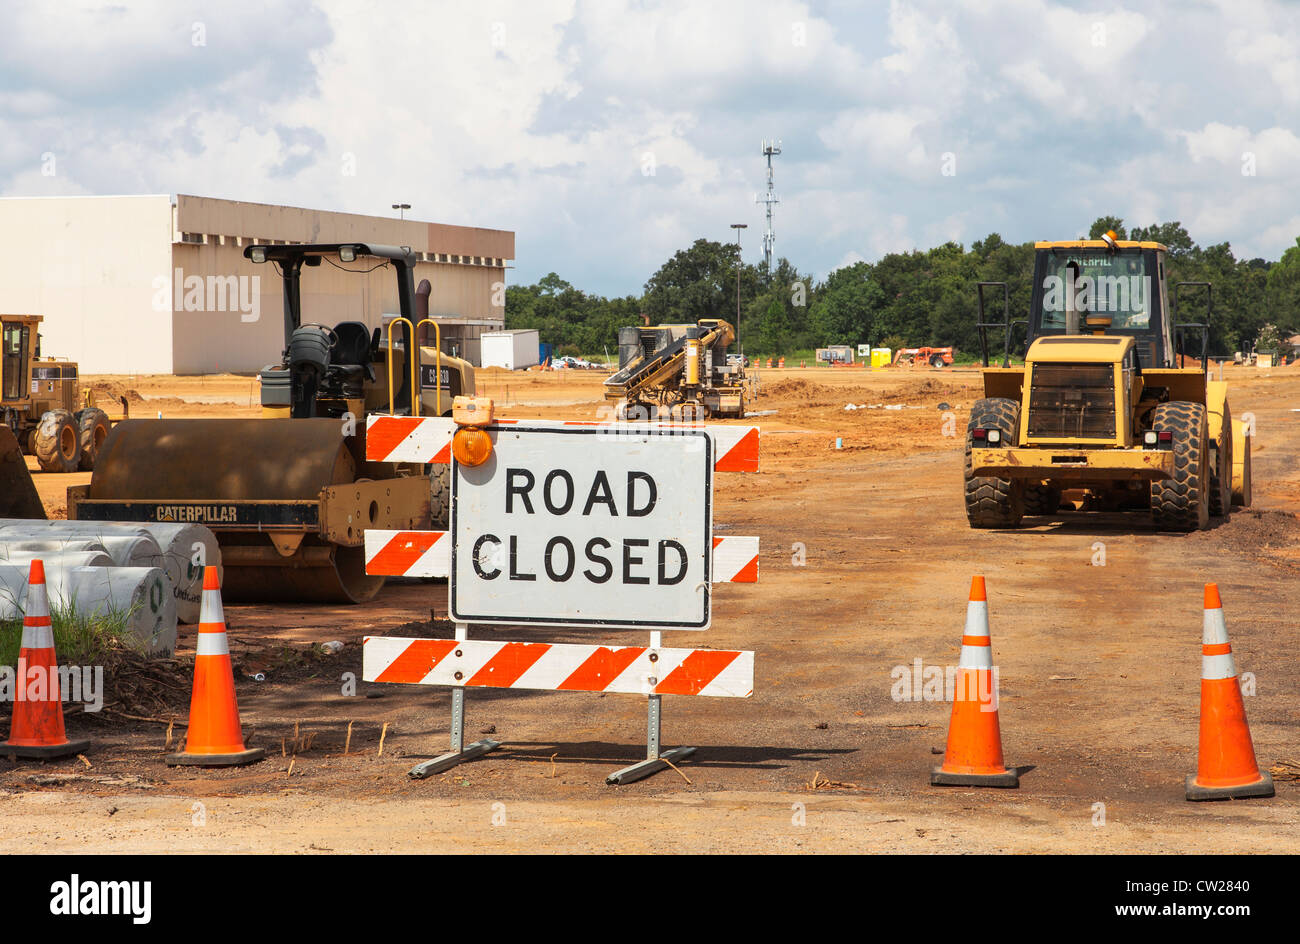 Road closed due to road construction, various road work industrial machinery Stock Photo